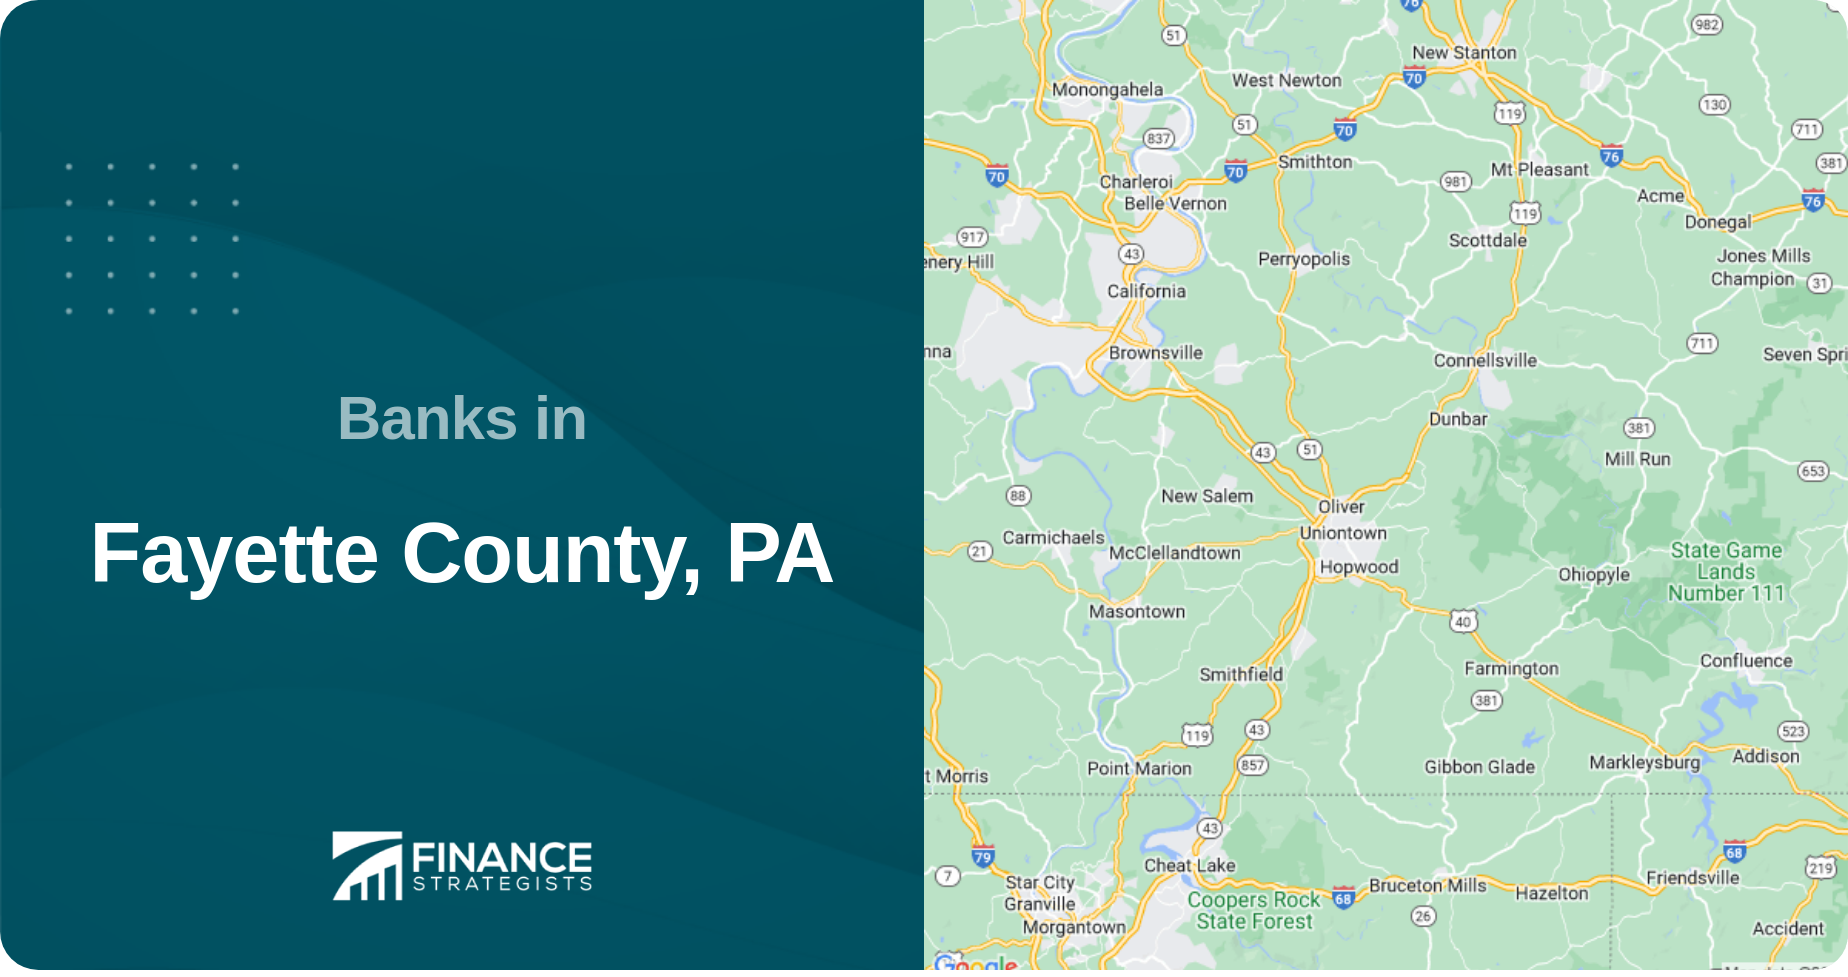 Banks in Fayette County, PA